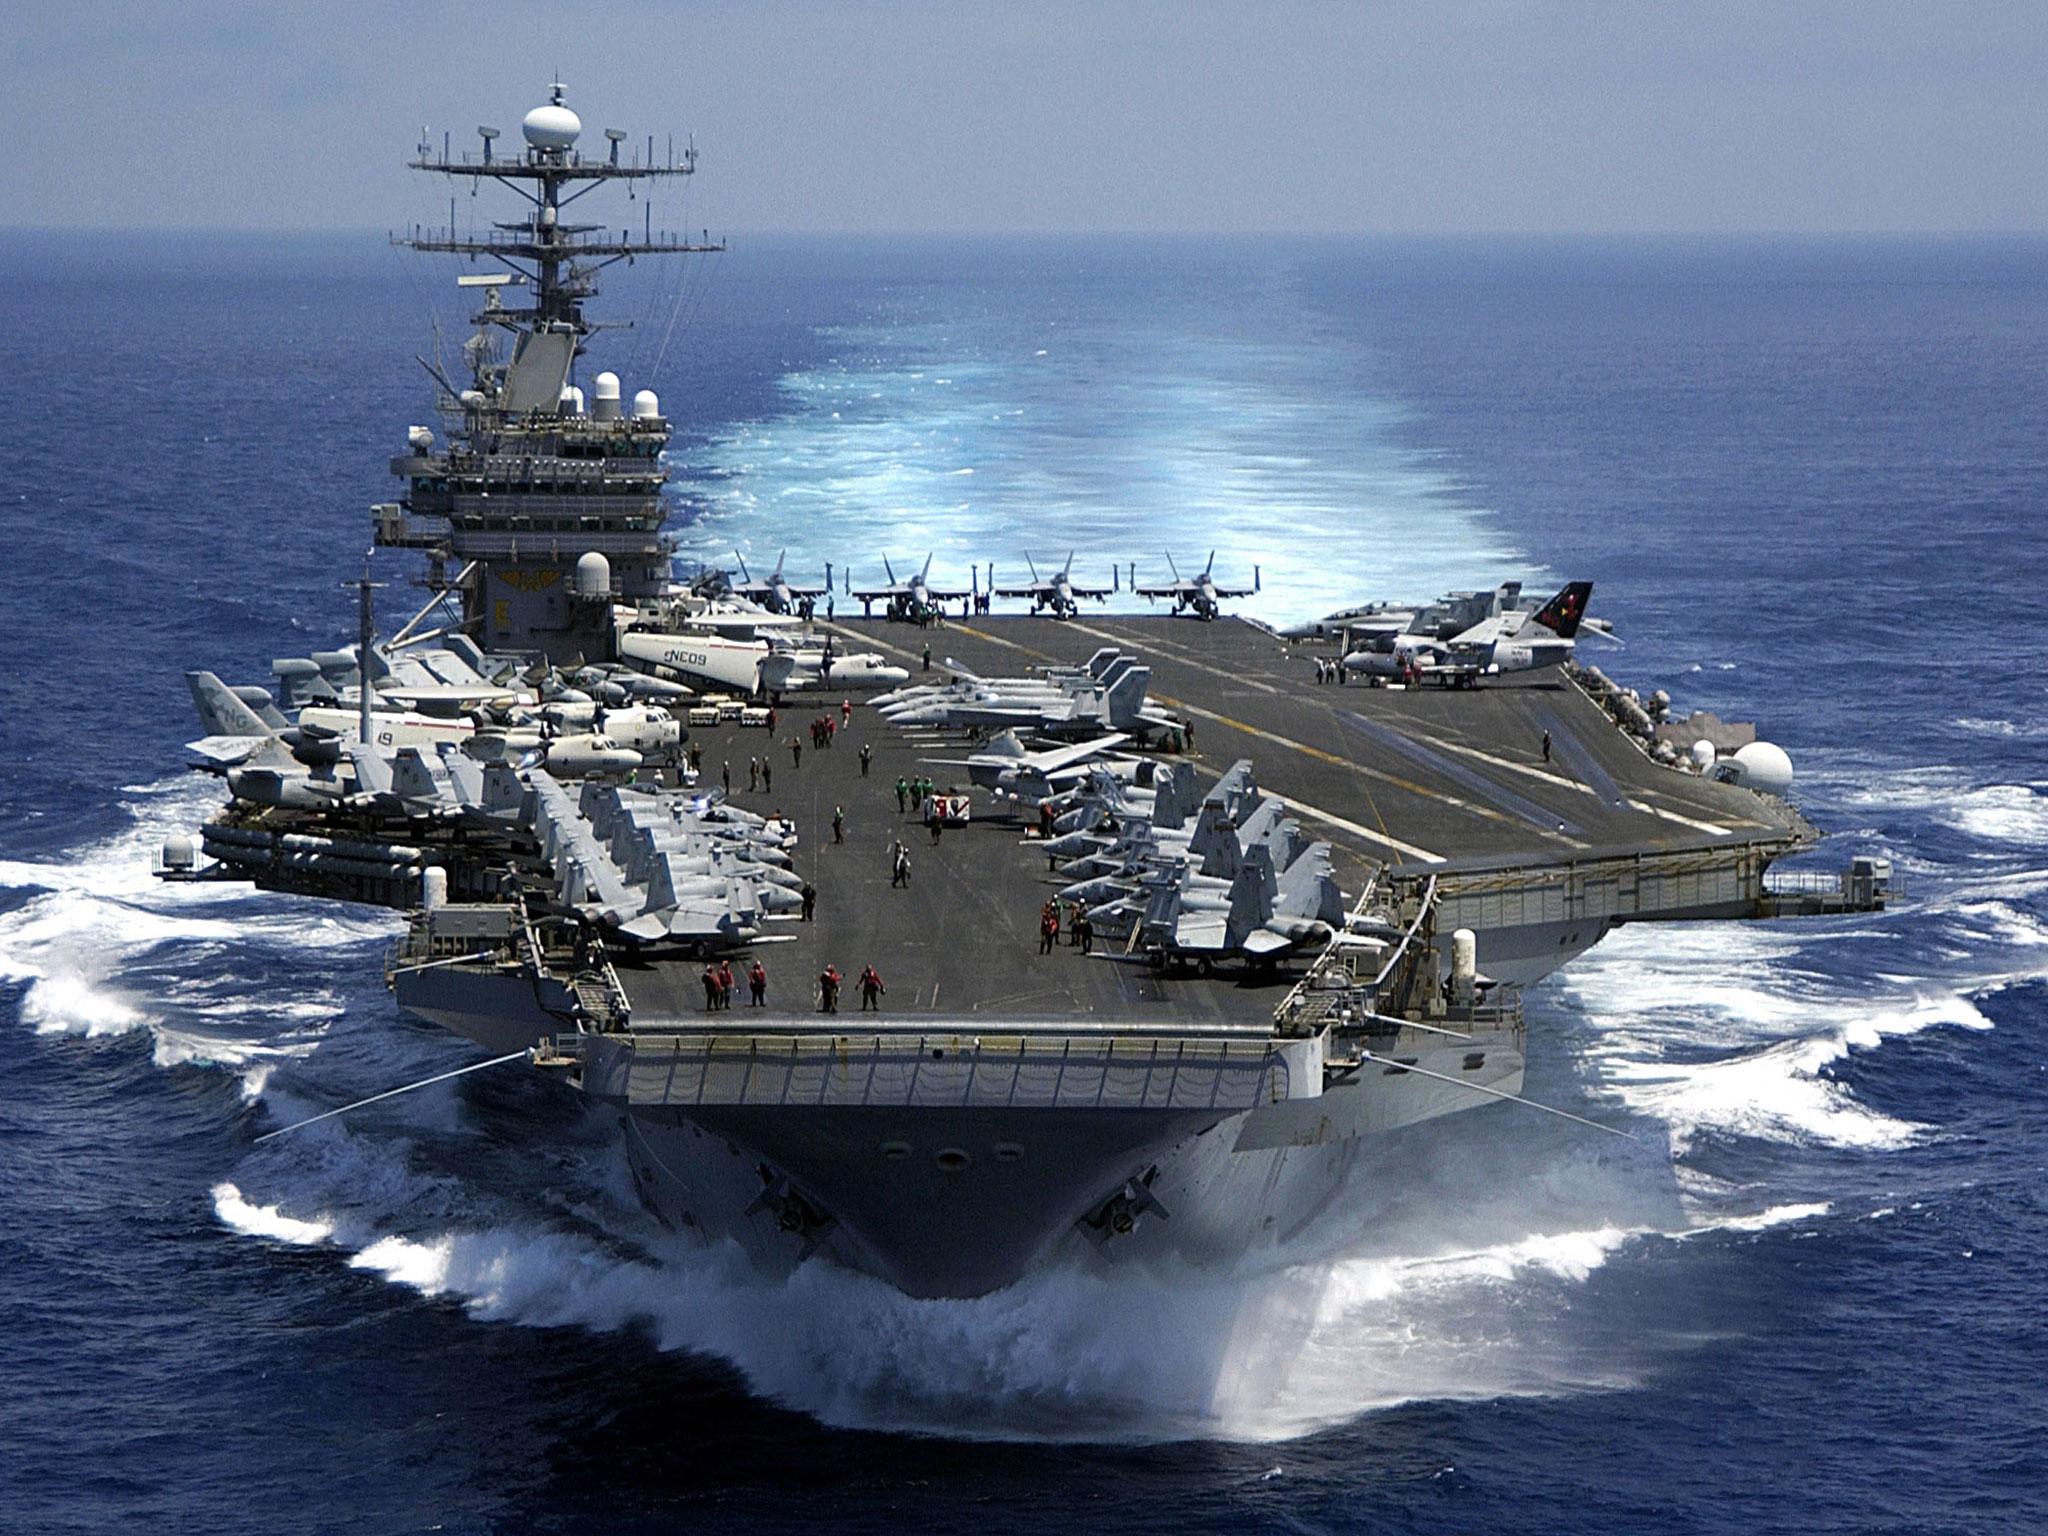 US Navy says the force, which includes the Nimitz-class aircraft carrier USS Carl Vinson and a fleet of supporting warships, has begun 'routine operations' in disputed waterway